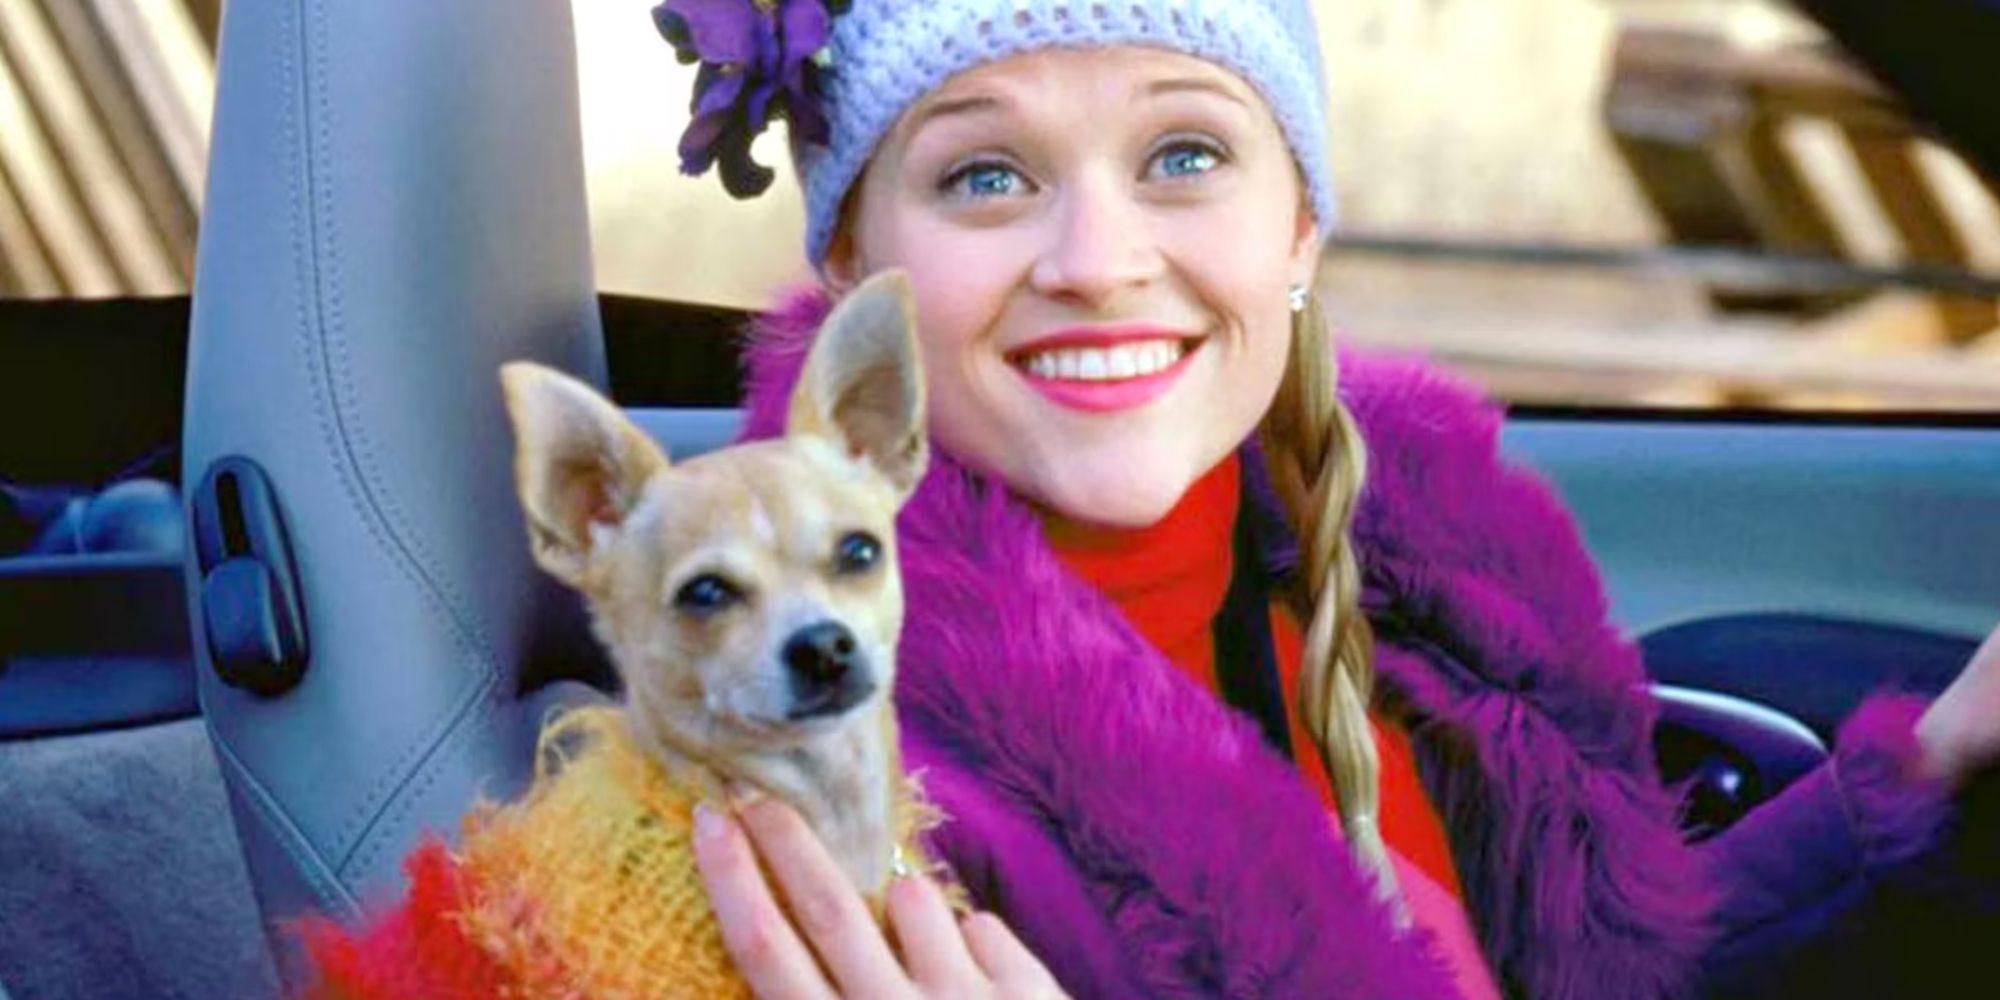 Reese Witherspoon as Elle Woods with Bruiser Woods in the car in Legally Blonde